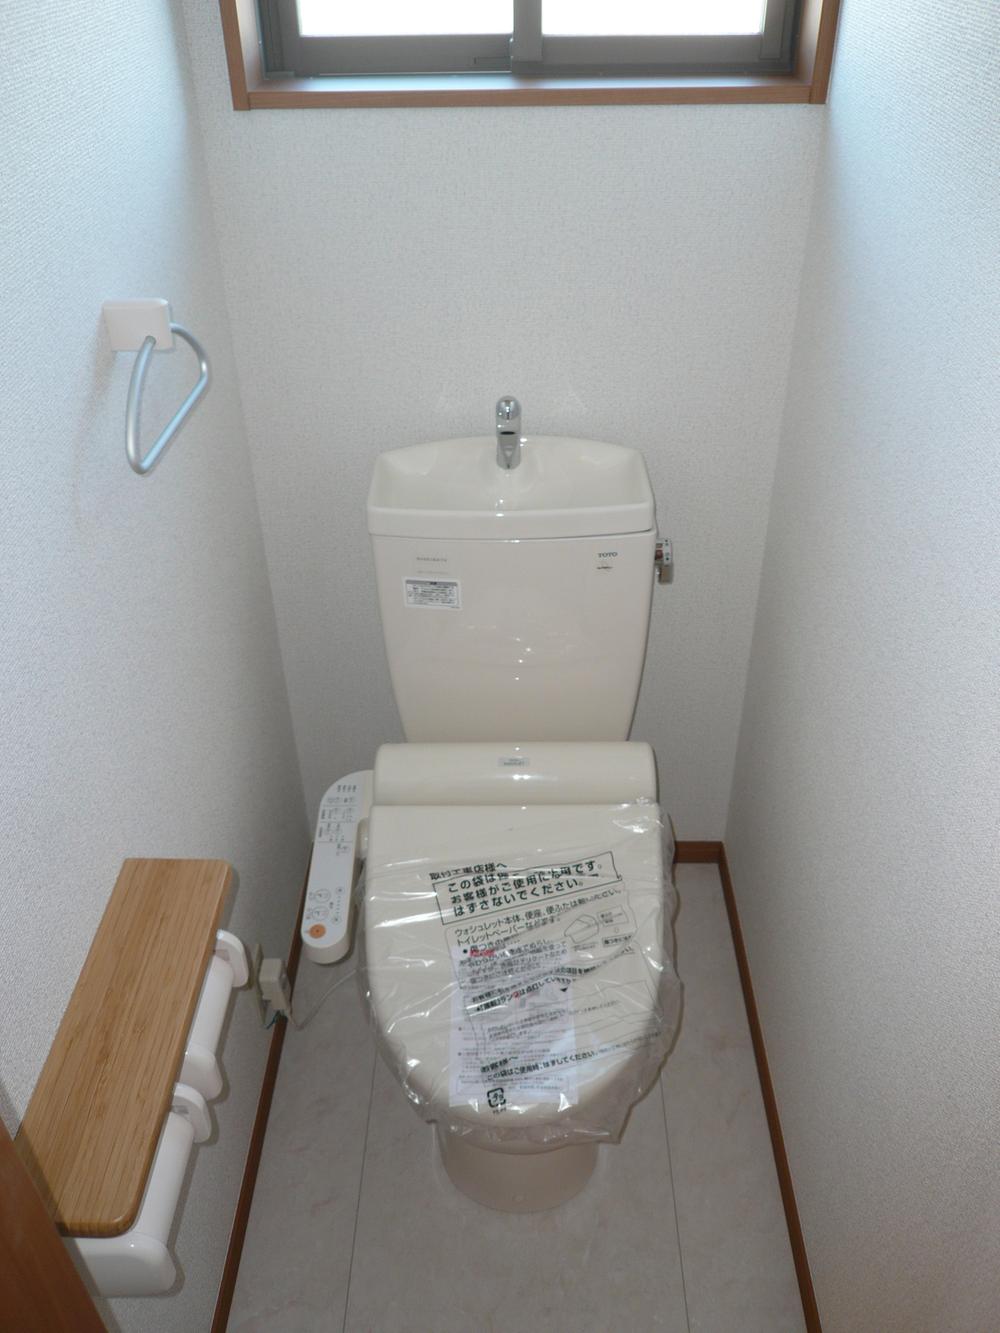 Other Equipment. ● same specifications ● 1, 2 Kaitomo Washlet ☆ Adopted anti-condensation toilet ☆